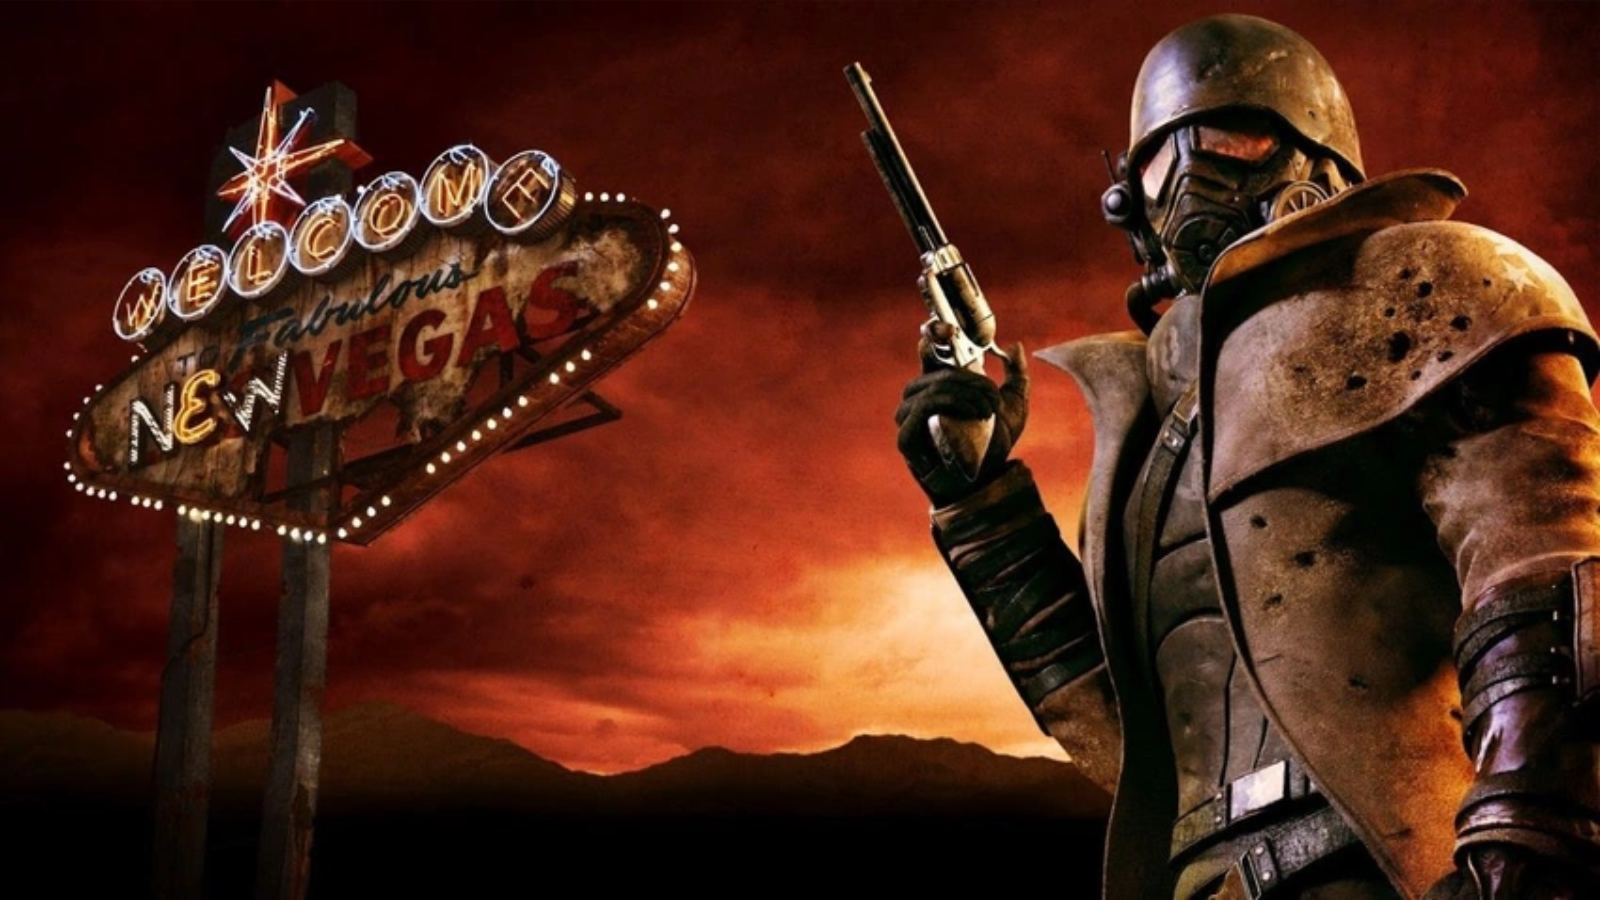 Welcome to Fallout: New Vegas – Enjoy Your Stay!